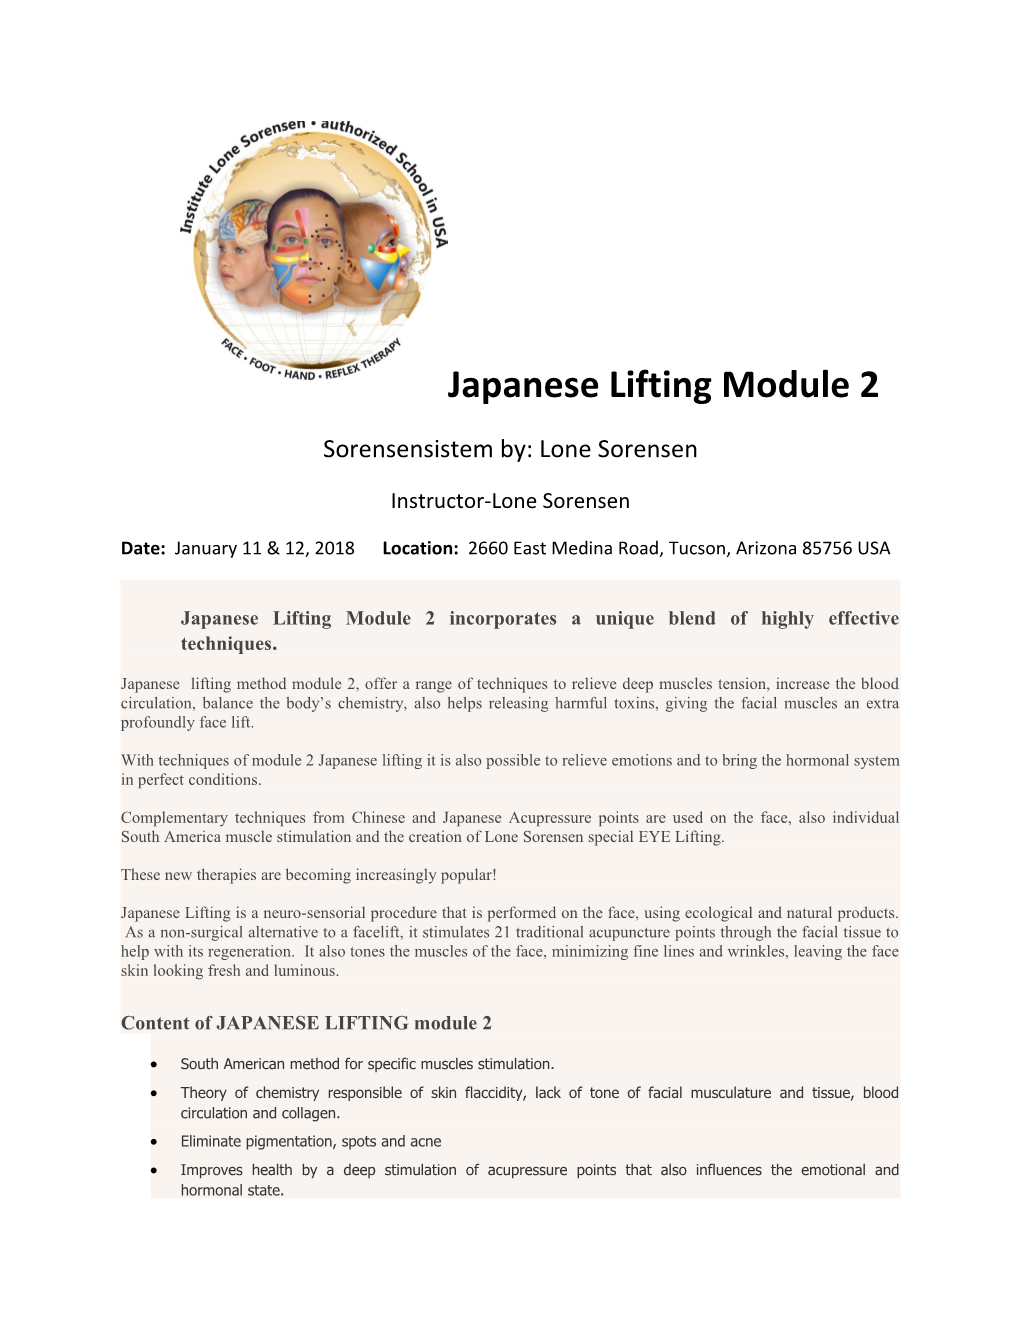 Japanese Lifting Module 2 Incorporates a Unique Blend of Highly Effective Techniques s2